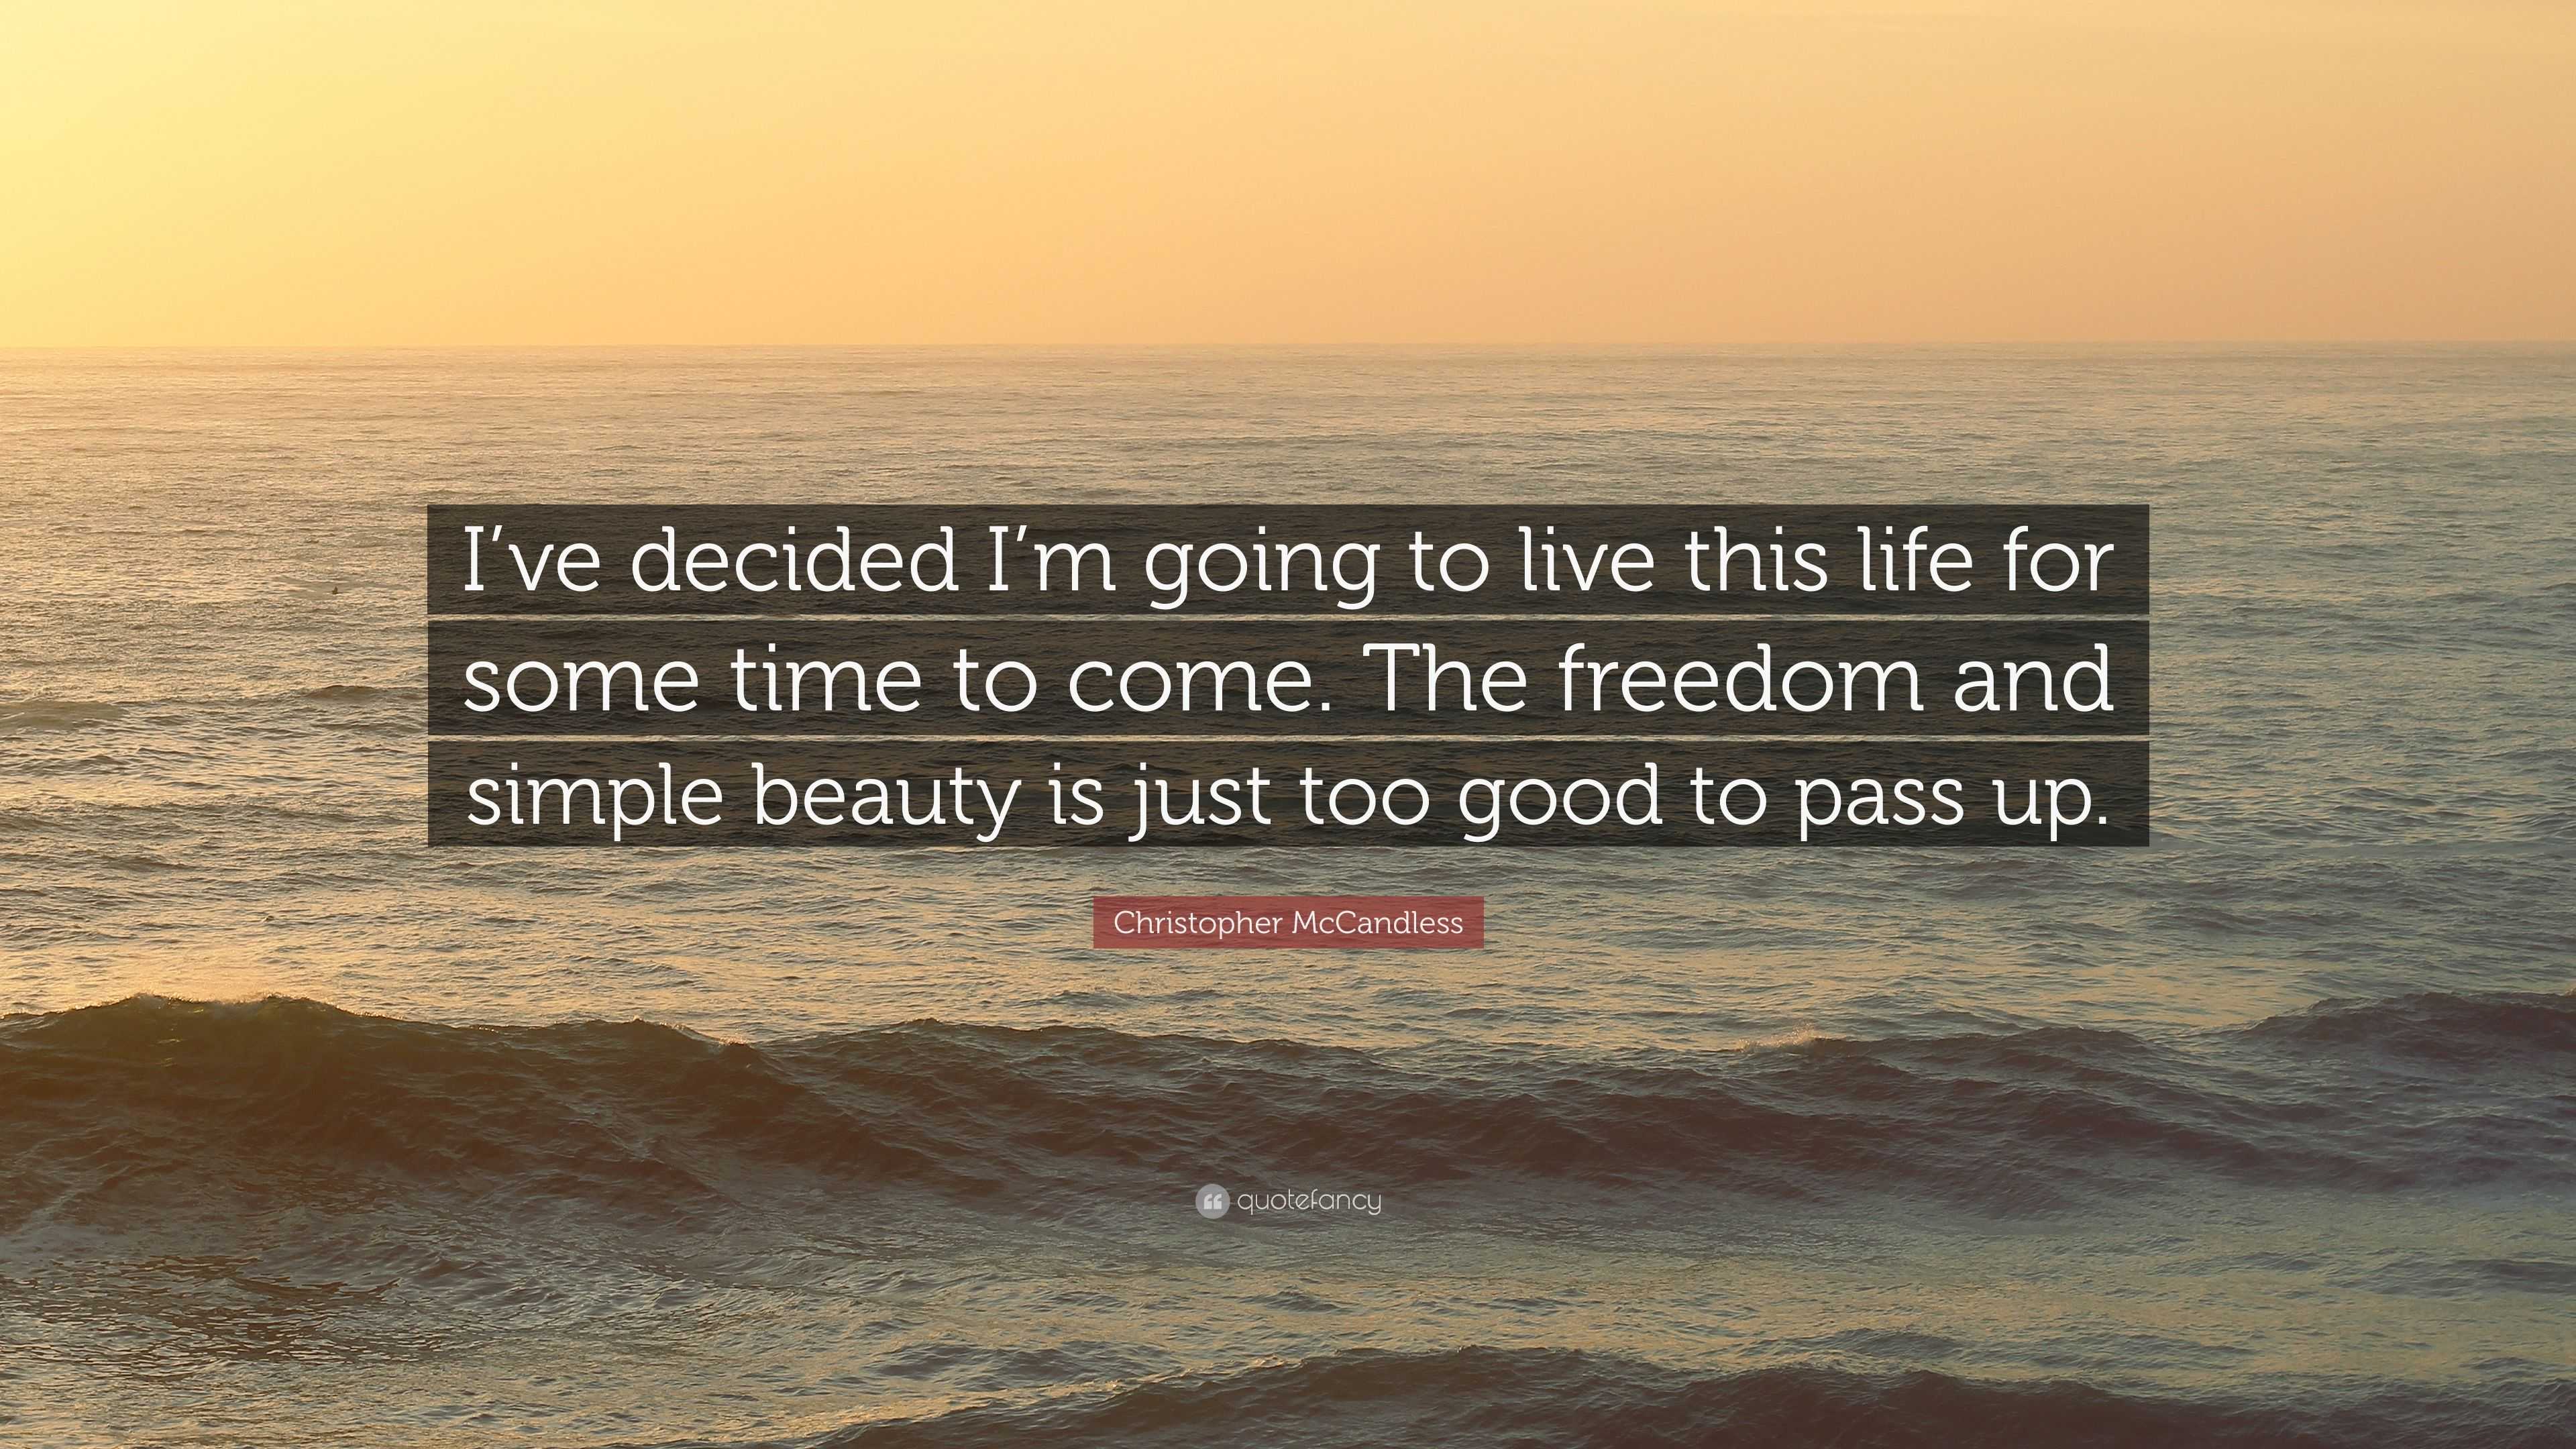 Christopher McCandless Quote “I ve decided I m going to live this